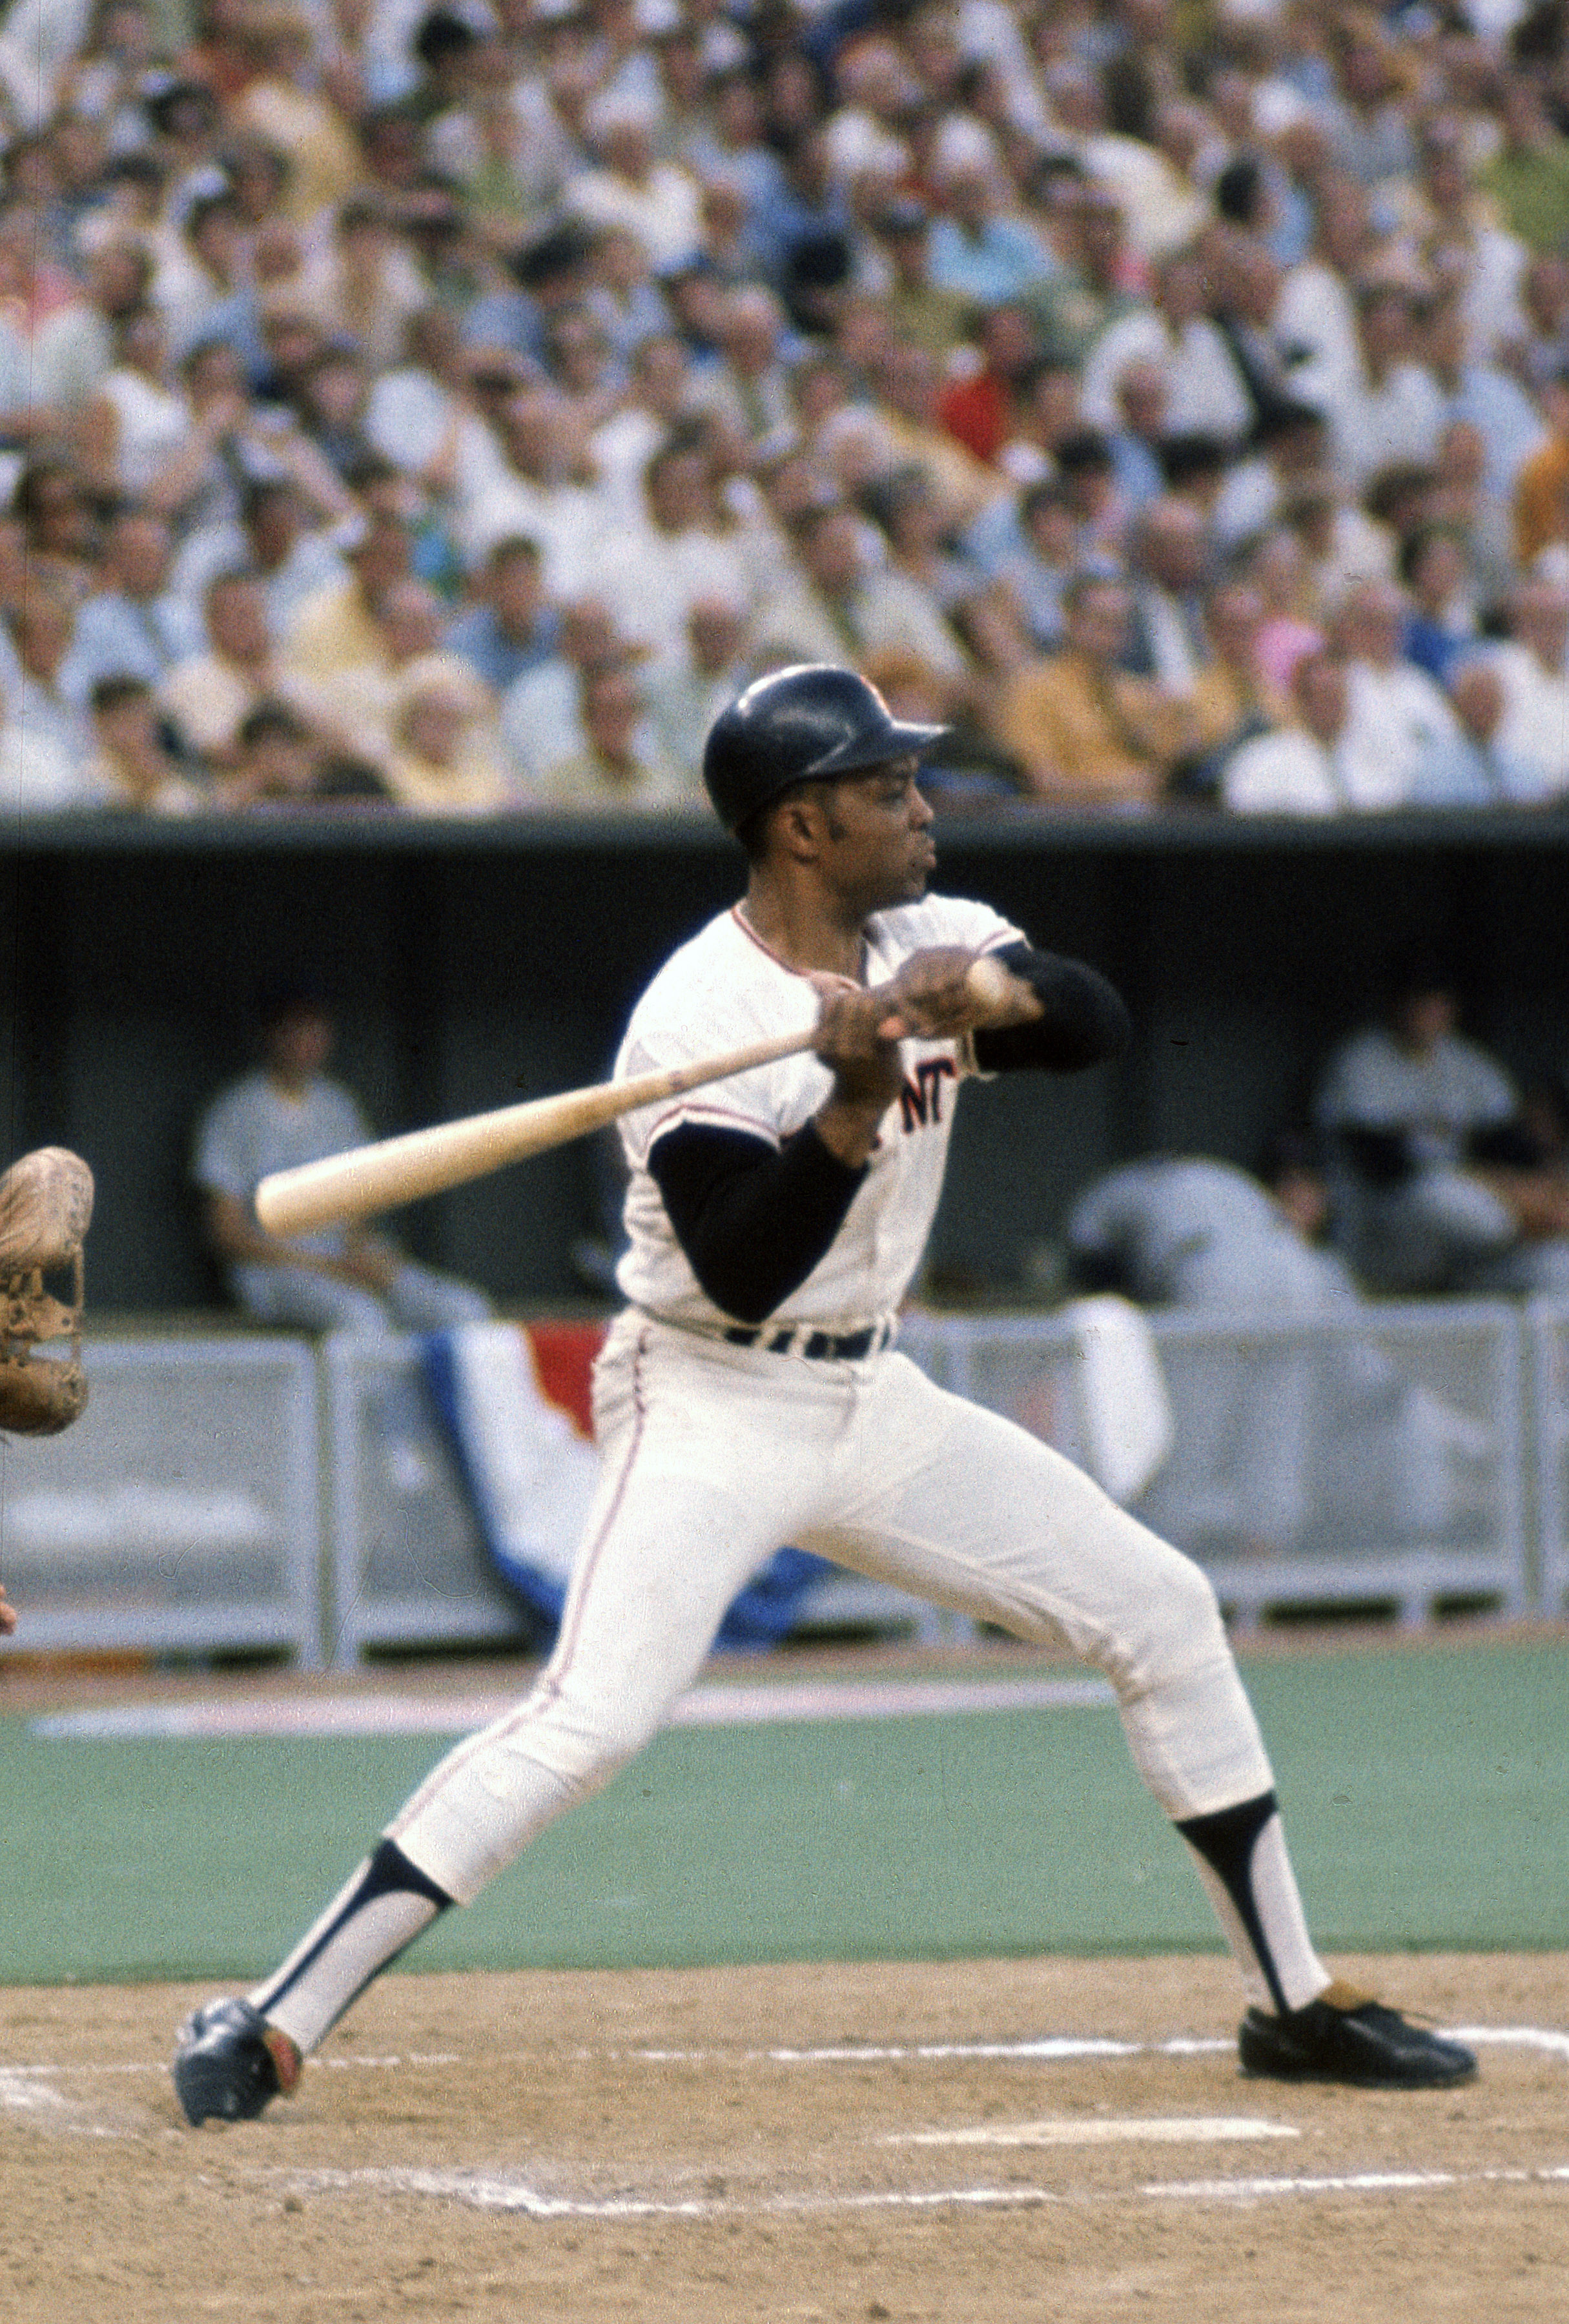 Willie Mays bats during the Major League Baseball All-Star game at Riverfront Stadium in Cincinnati on July 14, 1970. | Source: Getty Images